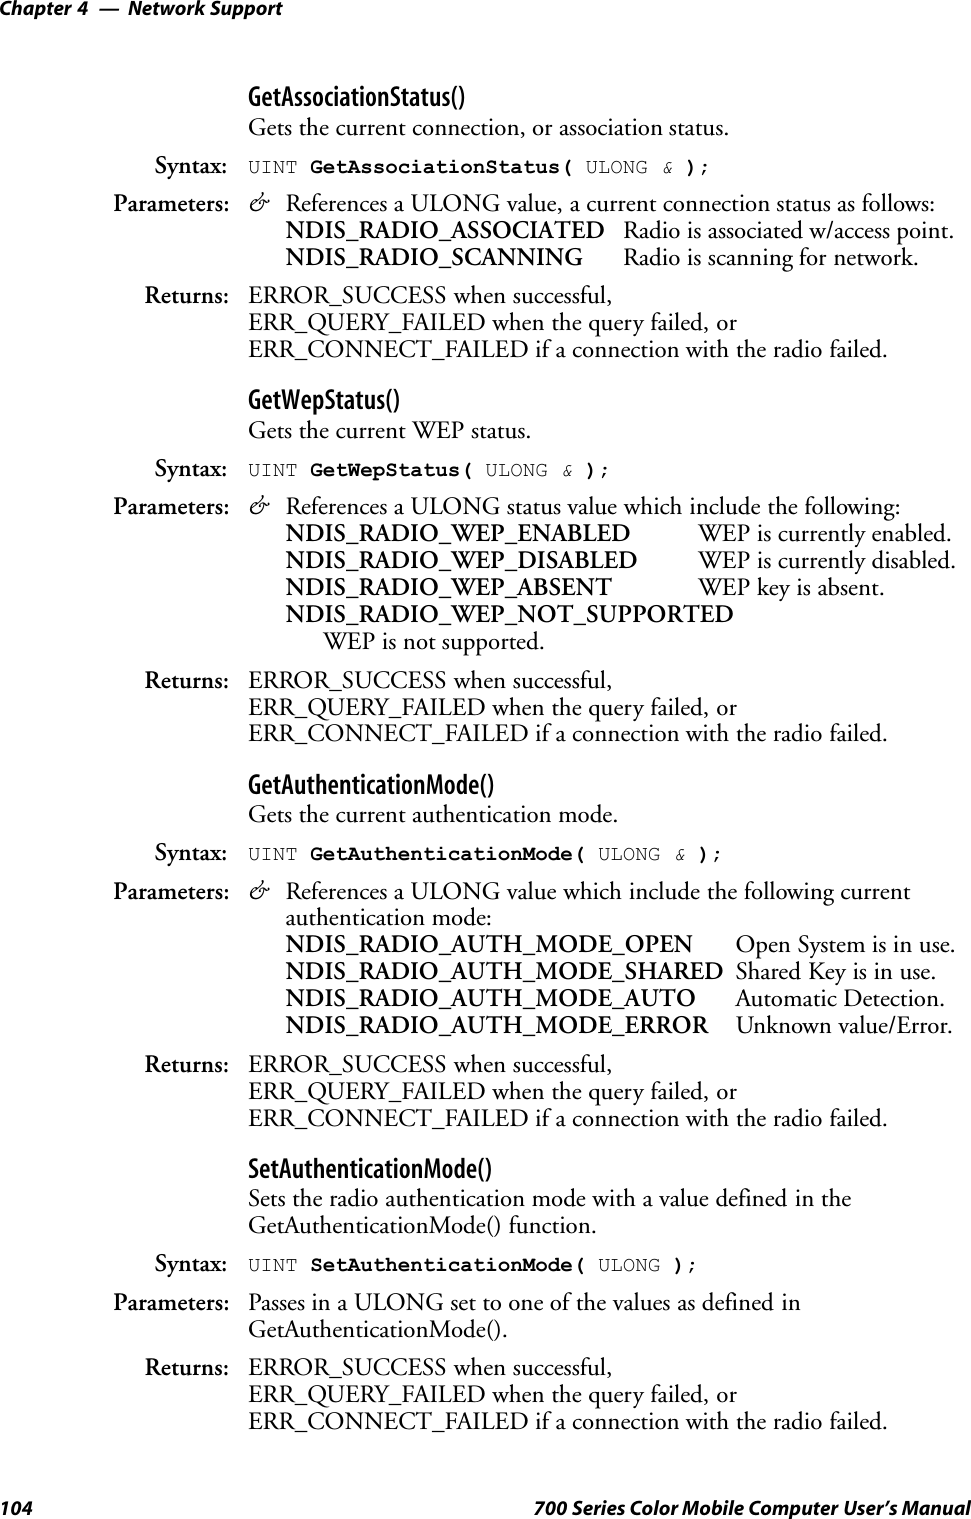 Network SupportChapter —4104 700 Series Color Mobile Computer User’s ManualGetAssociationStatus()Gets the current connection, or association status.Syntax: UINT GetAssociationStatus( ULONG &amp;);Parameters: &amp;References a ULONG value, a current connection status as follows:NDIS_RADIO_ASSOCIATED Radio is associated w/access point.NDIS_RADIO_SCANNING Radio is scanning for network.Returns: ERROR_SUCCESS when successful,ERR_QUERY_FAILED when the query failed, orERR_CONNECT_FAILED if a connection with the radio failed.GetWepStatus()Gets the current WEP status.Syntax: UINT GetWepStatus( ULONG &amp;);Parameters: &amp;References a ULONG status value which include the following:NDIS_RADIO_WEP_ENABLED WEP is currently enabled.NDIS_RADIO_WEP_DISABLED WEP is currently disabled.NDIS_RADIO_WEP_ABSENT WEP key is absent.NDIS_RADIO_WEP_NOT_SUPPORTEDWEP is not supported.Returns: ERROR_SUCCESS when successful,ERR_QUERY_FAILED when the query failed, orERR_CONNECT_FAILED if a connection with the radio failed.GetAuthenticationMode()Gets the current authentication mode.Syntax: UINT GetAuthenticationMode( ULONG &amp;);Parameters: &amp;References a ULONG value which include the following currentauthentication mode:NDIS_RADIO_AUTH_MODE_OPEN Open System is in use.NDIS_RADIO_AUTH_MODE_SHARED Shared Key is in use.NDIS_RADIO_AUTH_MODE_AUTO Automatic Detection.NDIS_RADIO_AUTH_MODE_ERROR Unknown value/Error.Returns: ERROR_SUCCESS when successful,ERR_QUERY_FAILED when the query failed, orERR_CONNECT_FAILED if a connection with the radio failed.SetAuthenticationMode()Sets the radio authentication mode with a value defined in theGetAuthenticationMode() function.Syntax: UINT SetAuthenticationMode( ULONG );Parameters: Passes in a ULONG set to one of the values as defined inGetAuthenticationMode().Returns: ERROR_SUCCESS when successful,ERR_QUERY_FAILED when the query failed, orERR_CONNECT_FAILED if a connection with the radio failed.